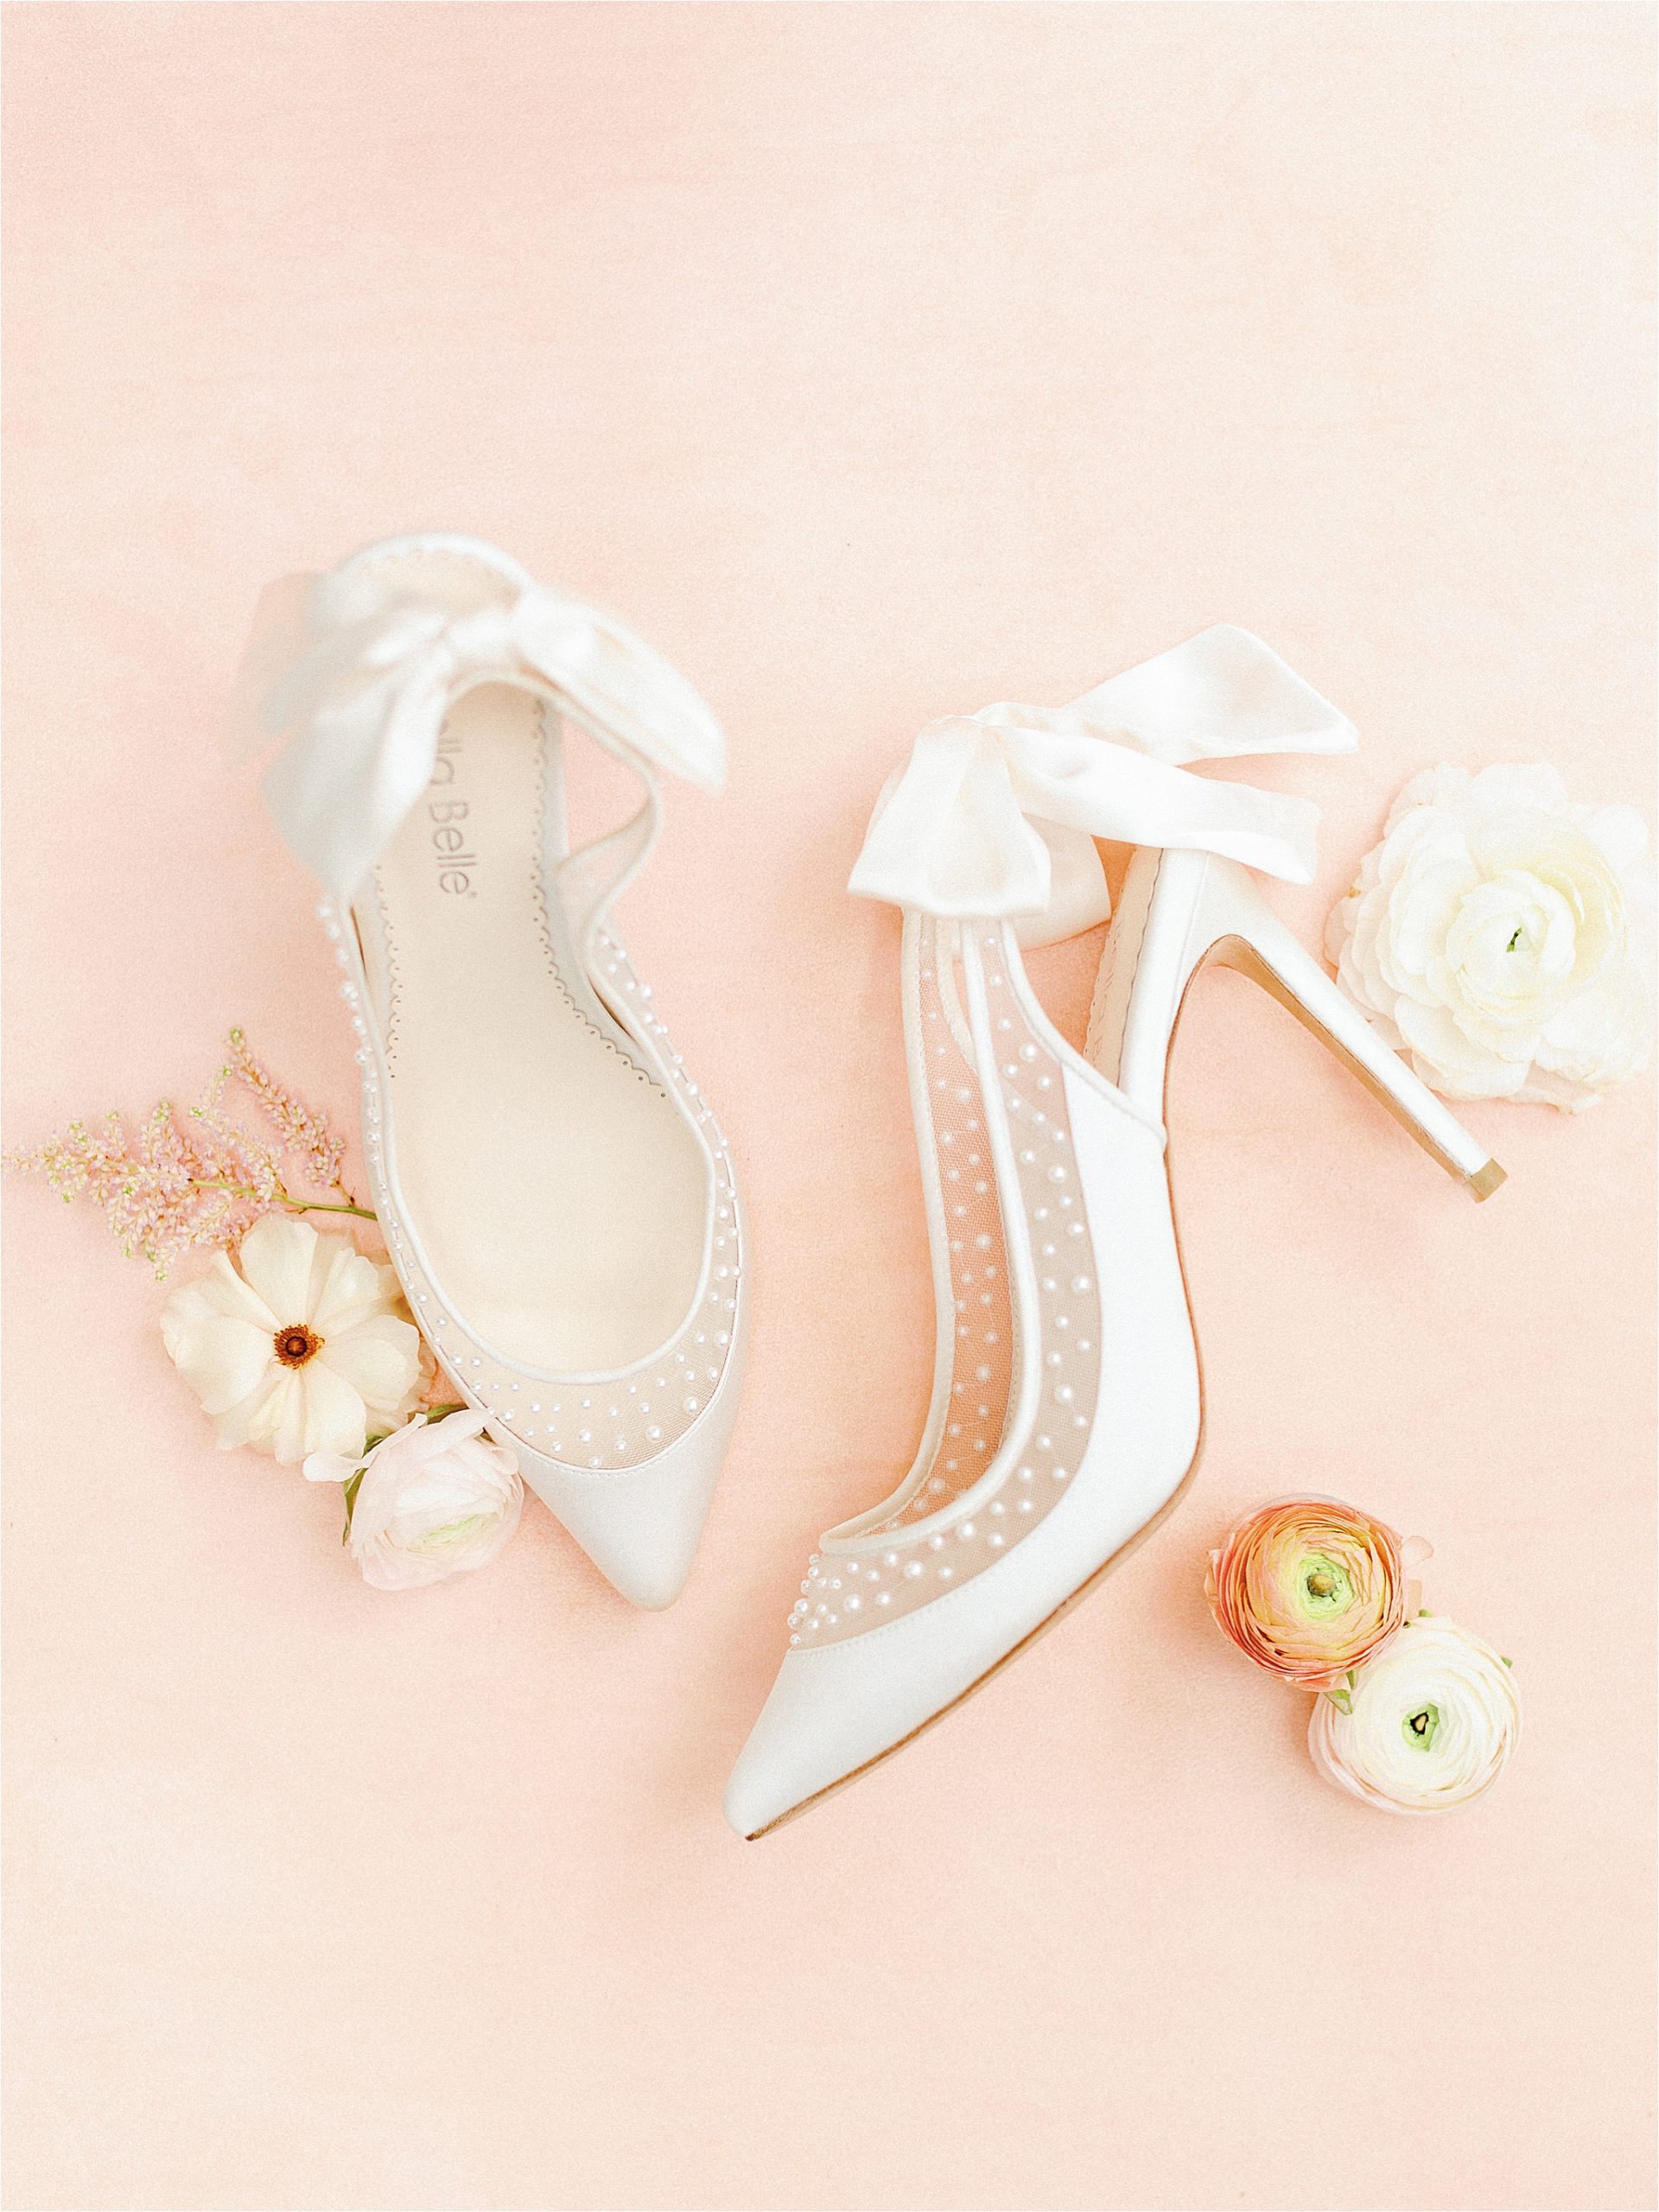 bella belle shoes at peach and pink wedding 